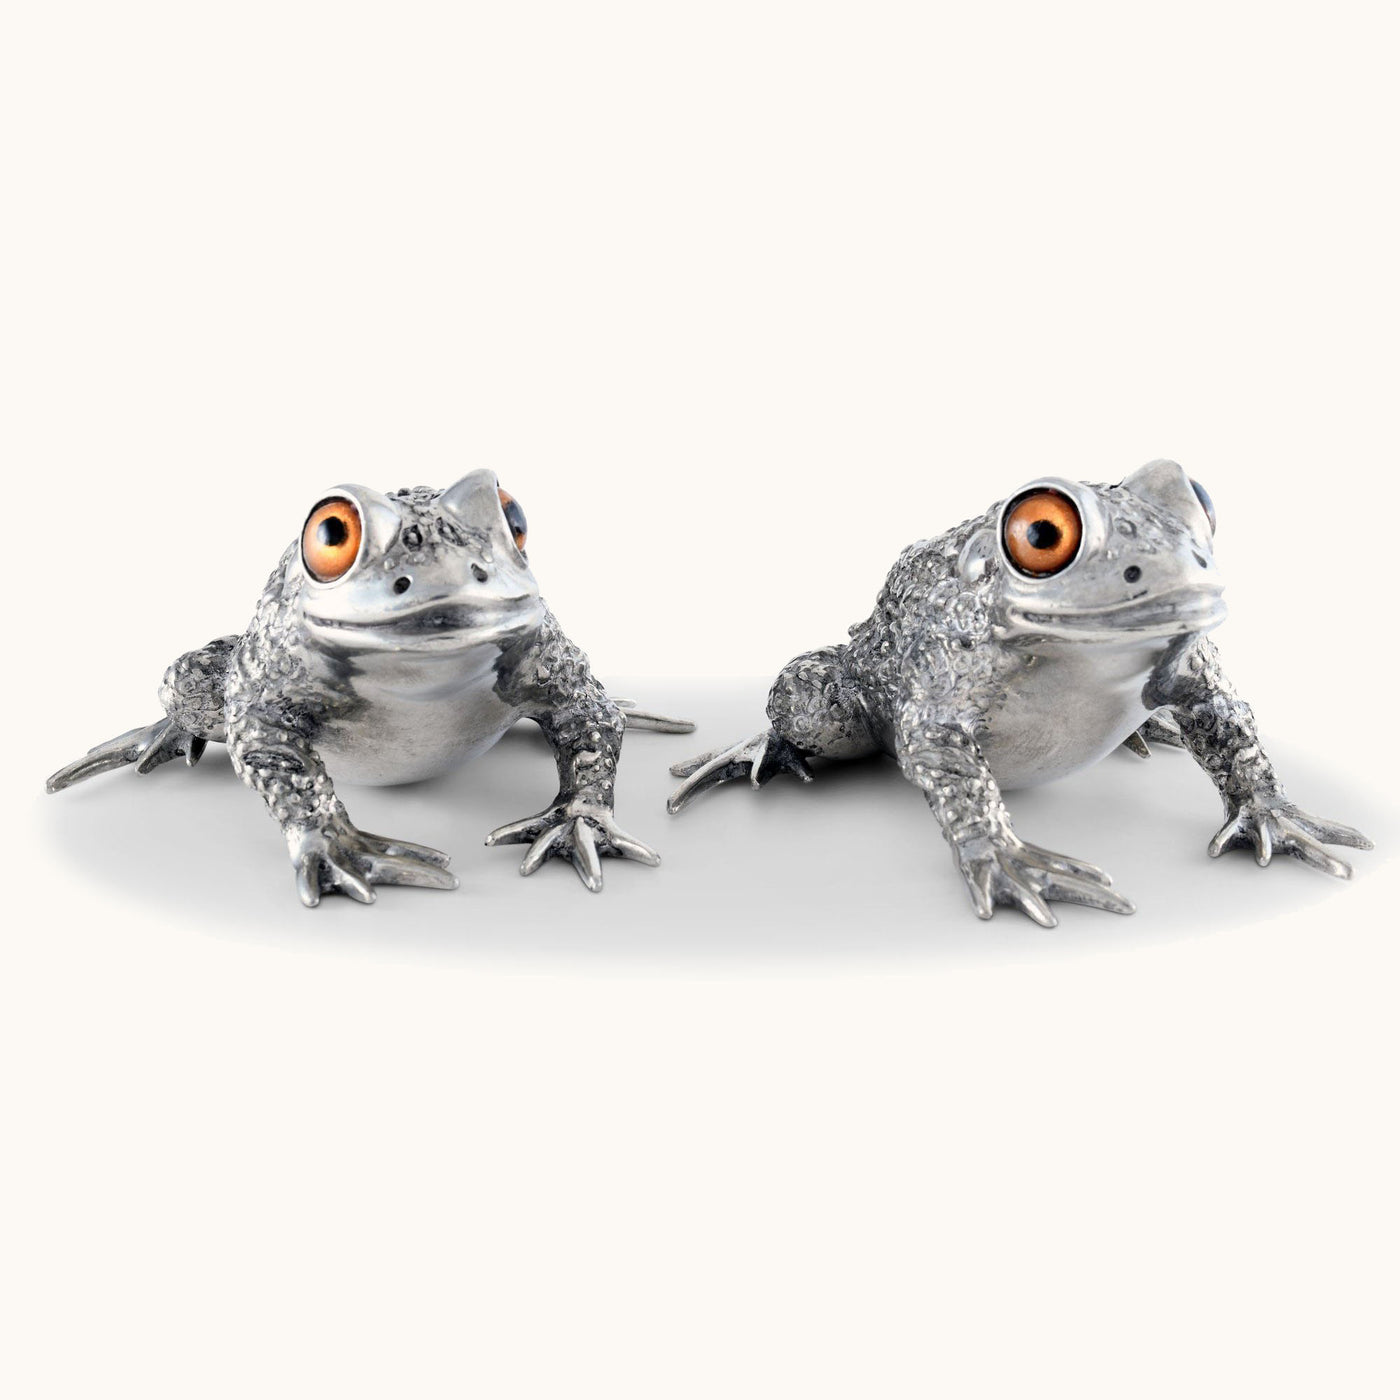 Toad Salt And Pepper